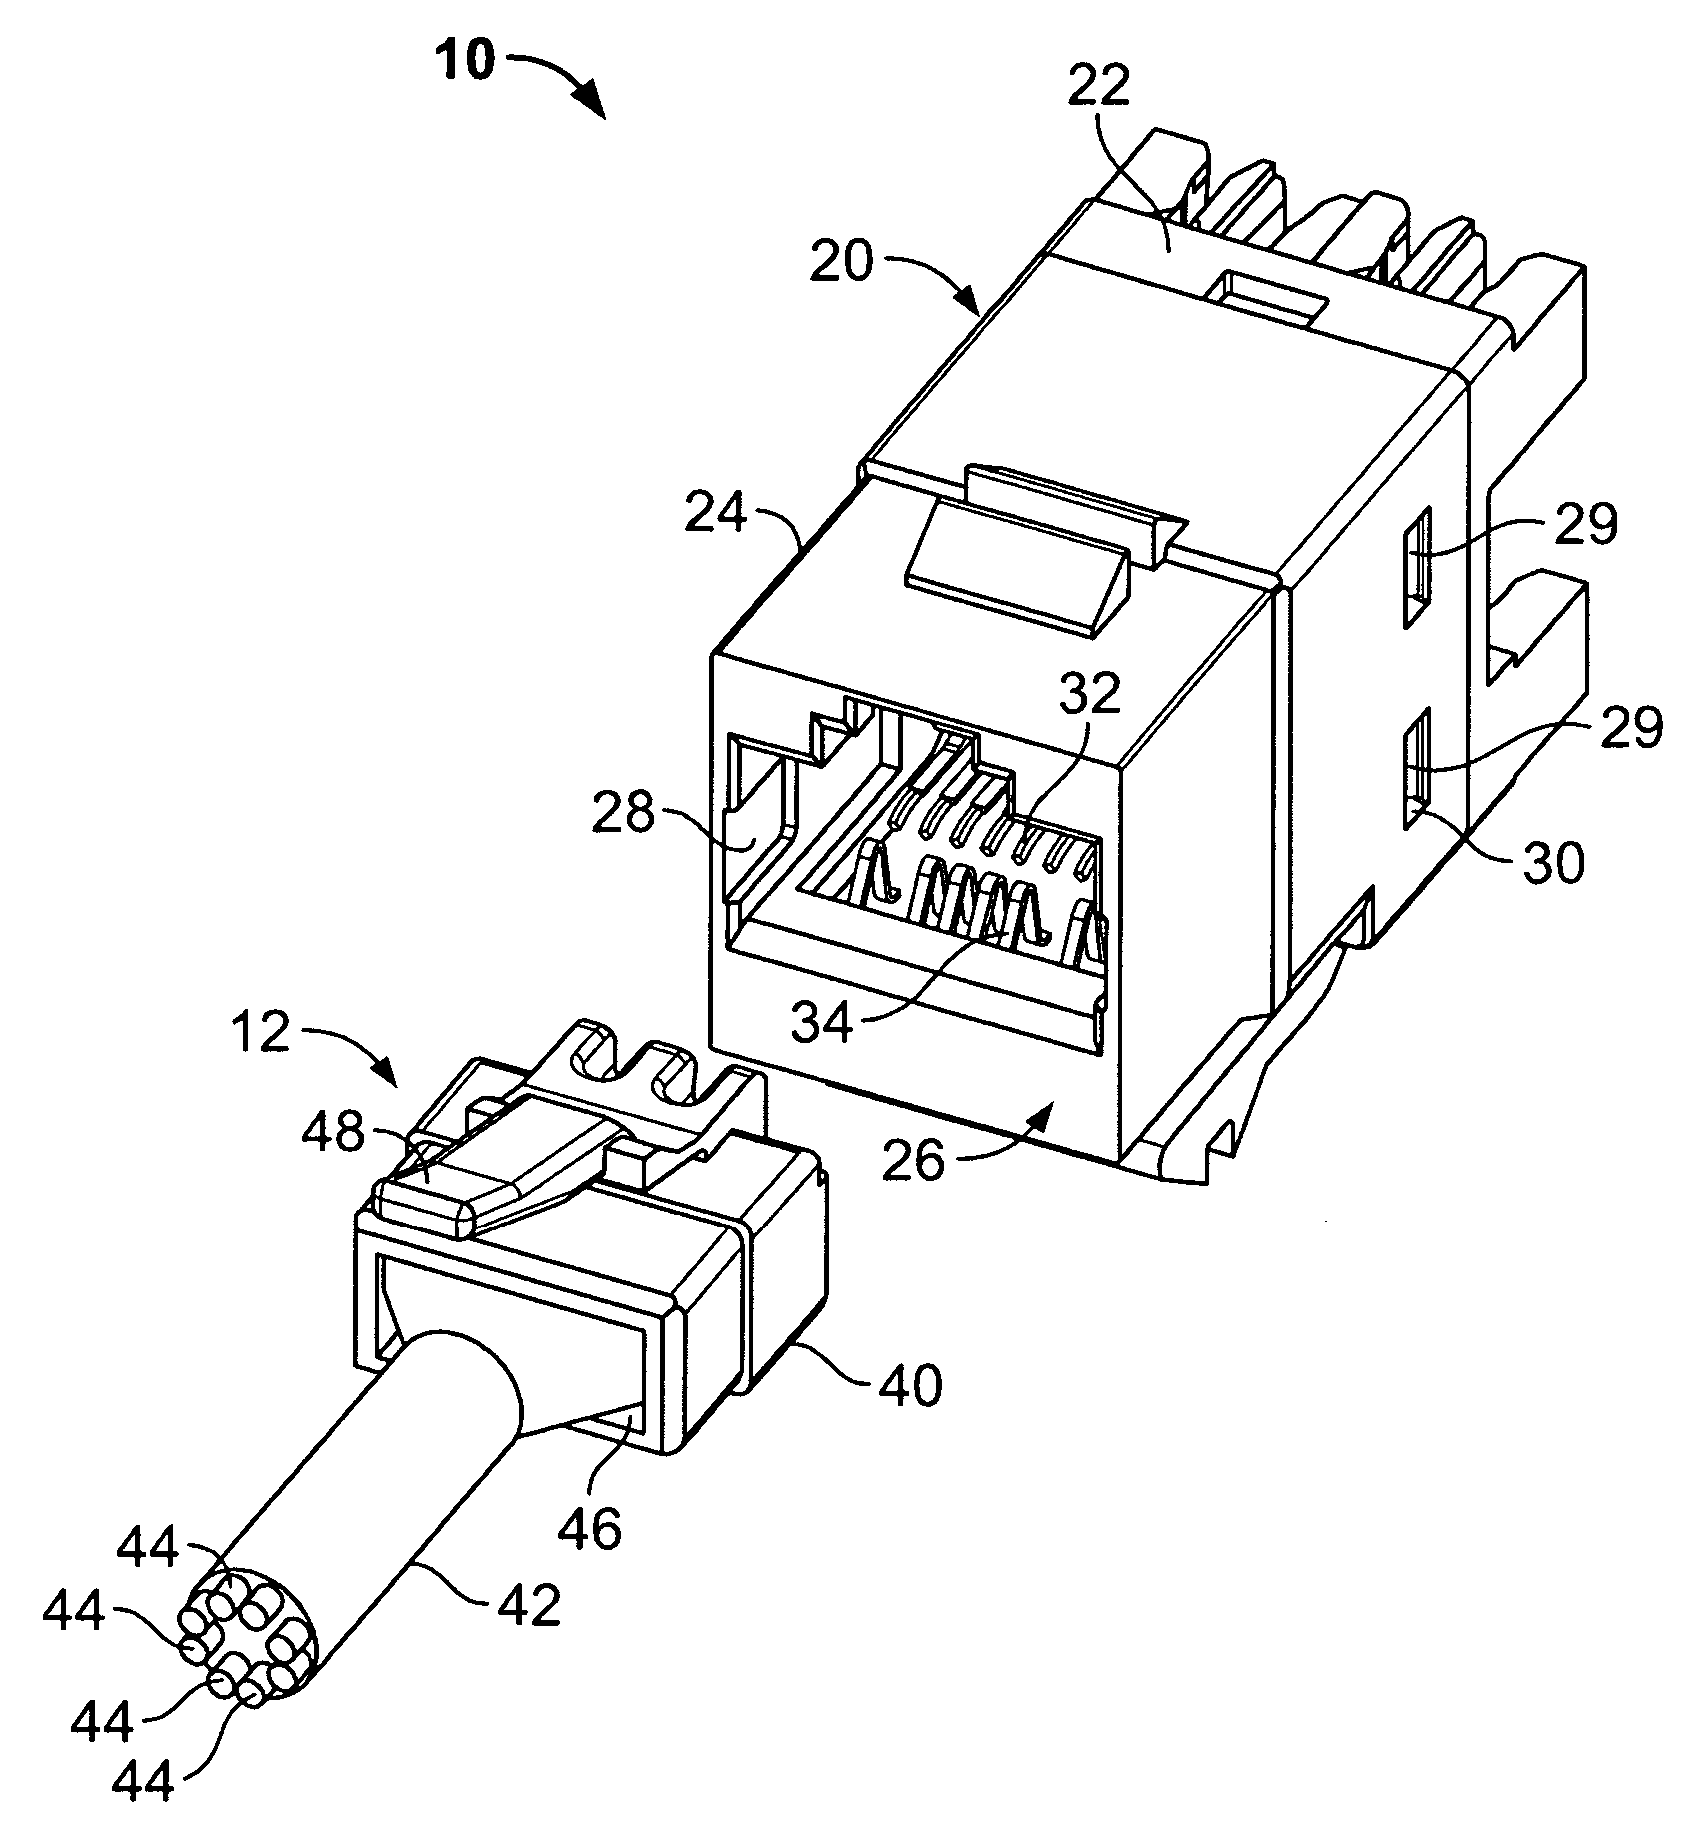 Electrical connector with crosstalk compensation